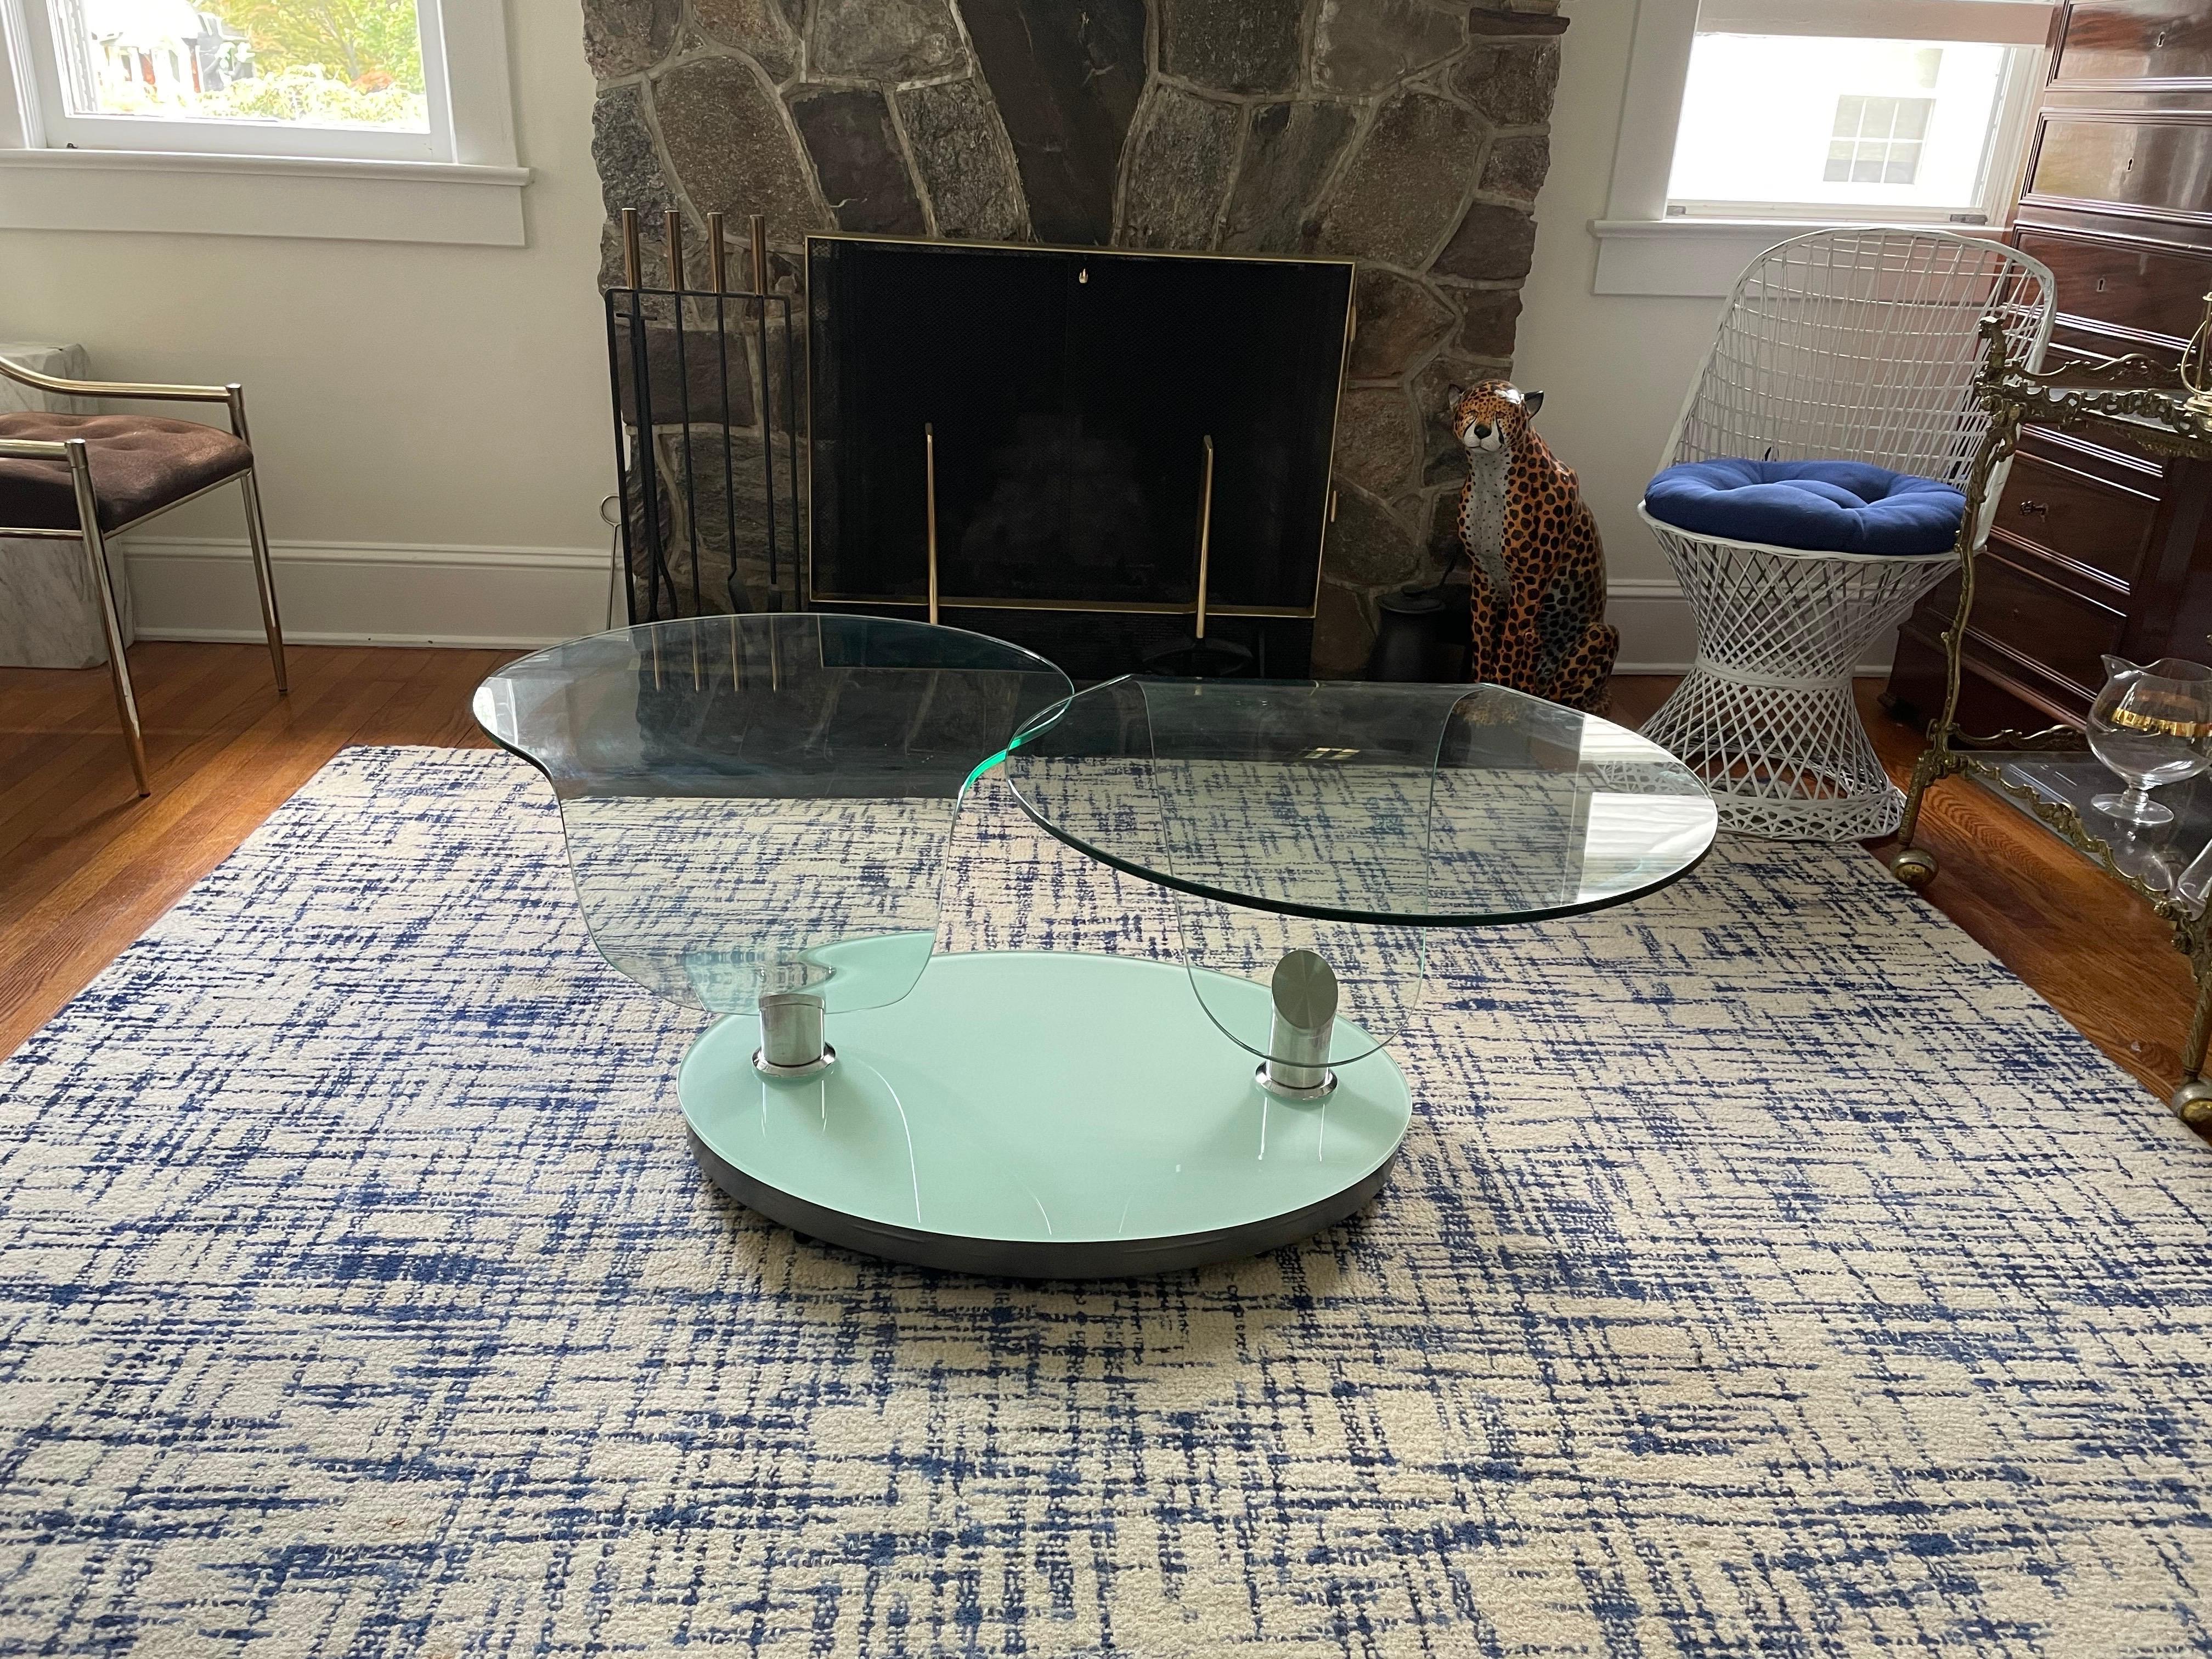 This stunning vintage modern coffee table features two free-form glass tops that swivel. Sleek design allows the width of the top to go from 34 inches wide to 63.25 inches wide. This beautiful table swivels inward saving plenty of space when it is